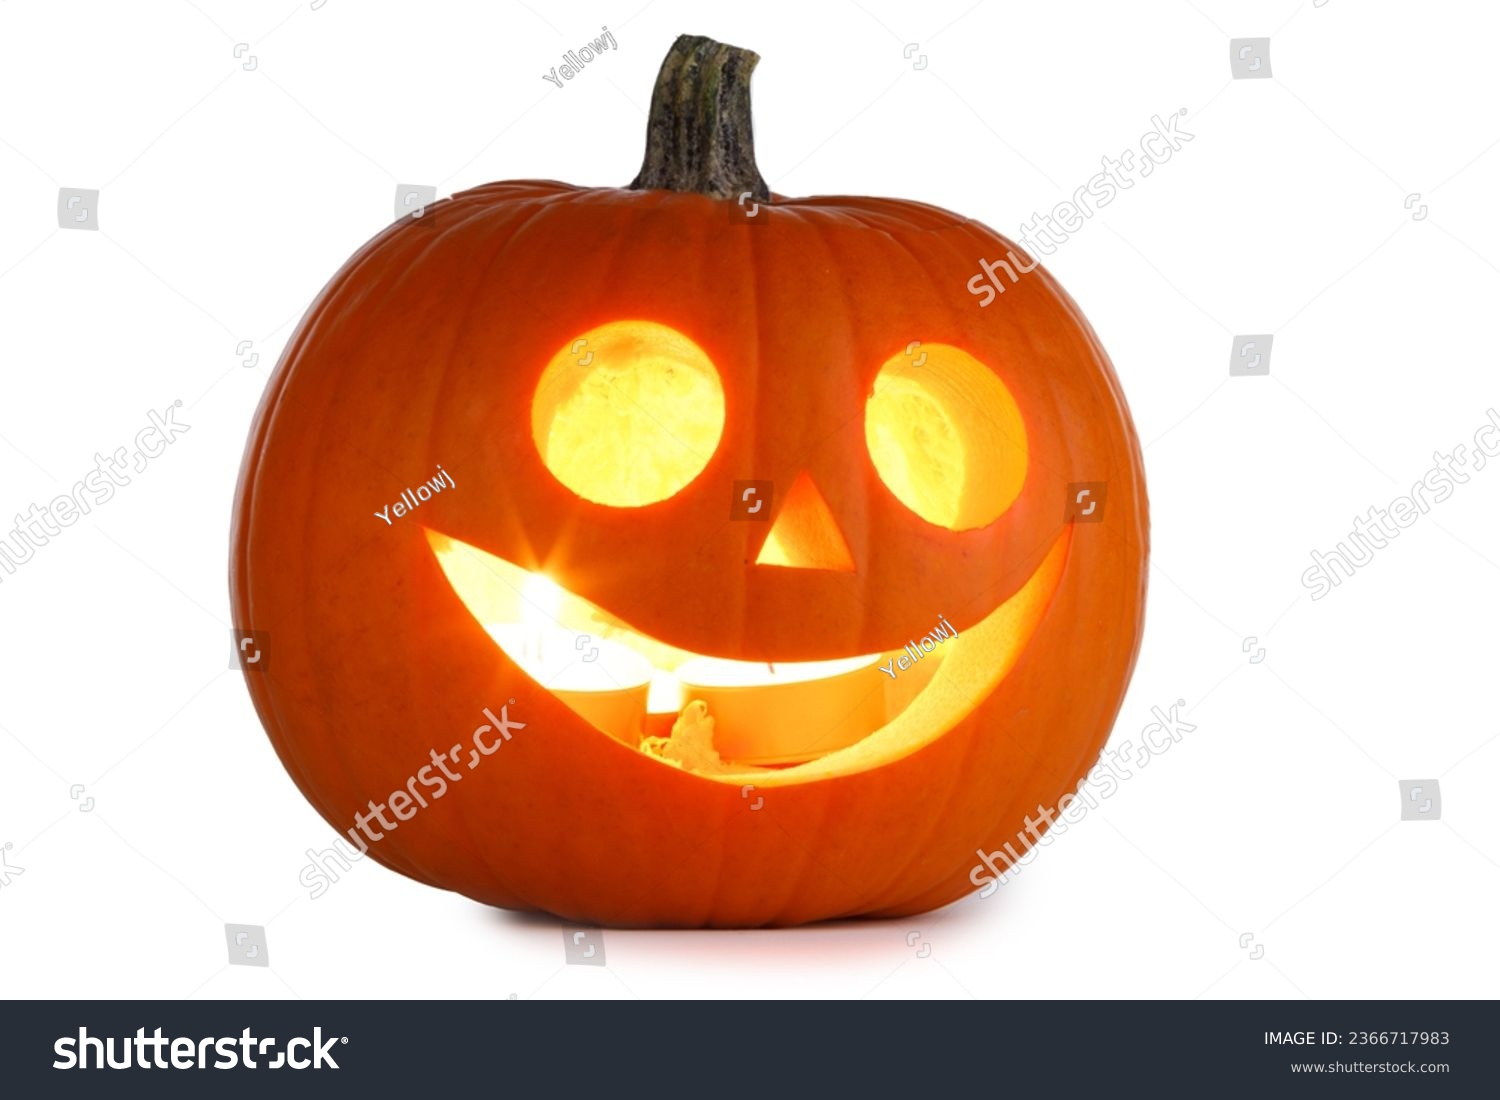 Funny Jack O Lantern halloween pumpkin with candle light inside isolated on white background #2366717983